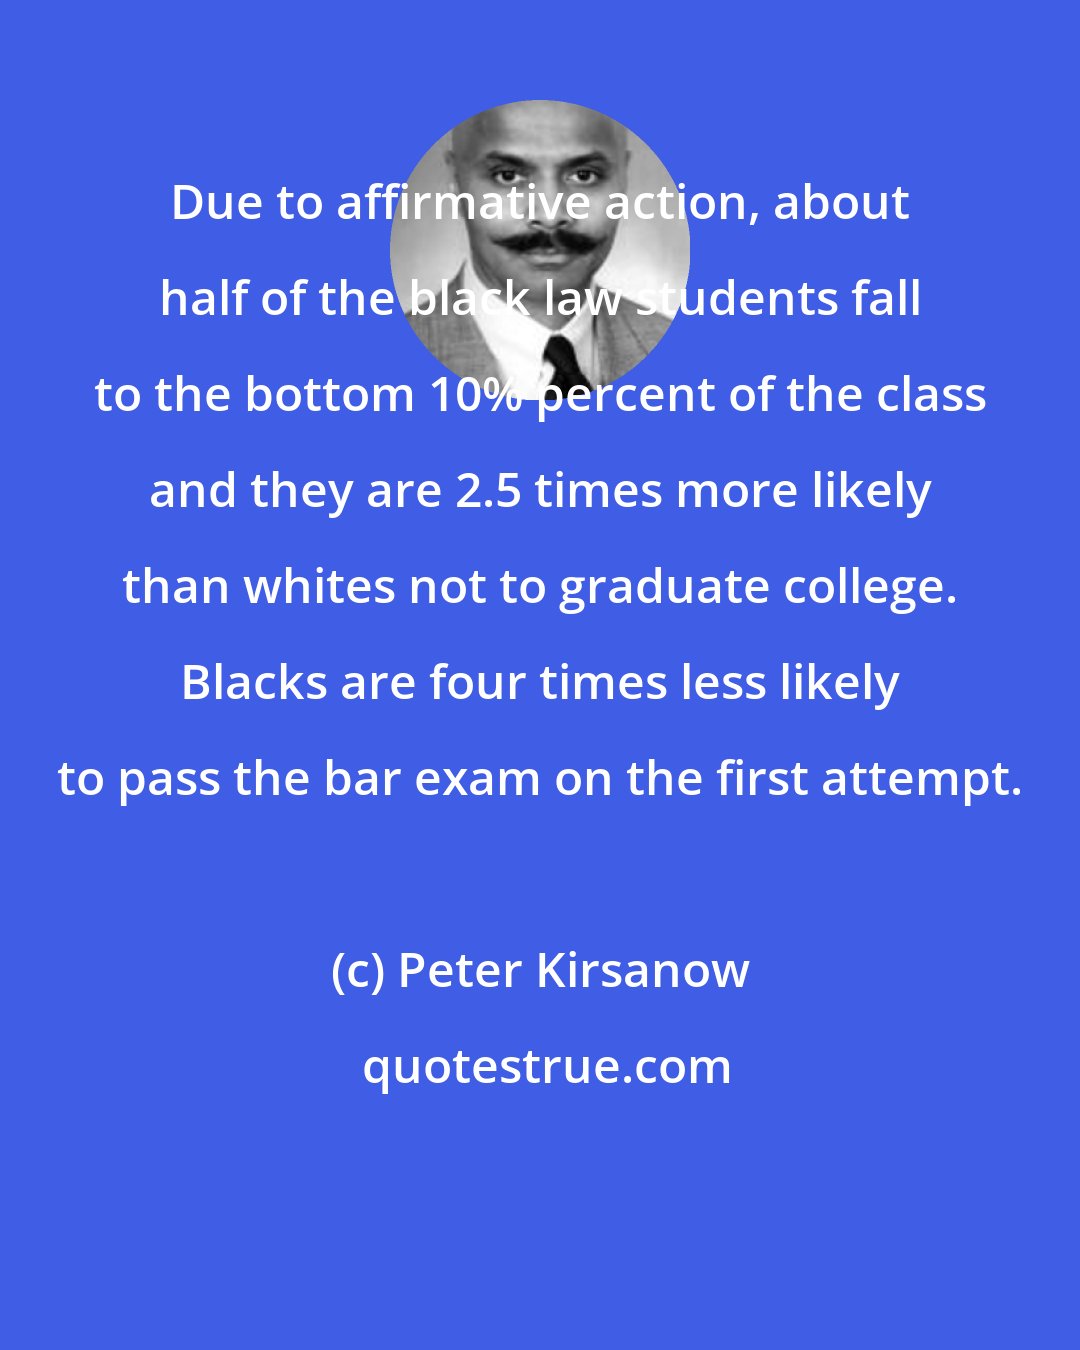 Peter Kirsanow: Due to affirmative action, about half of the black law students fall to the bottom 10% percent of the class and they are 2.5 times more likely than whites not to graduate college. Blacks are four times less likely to pass the bar exam on the first attempt.